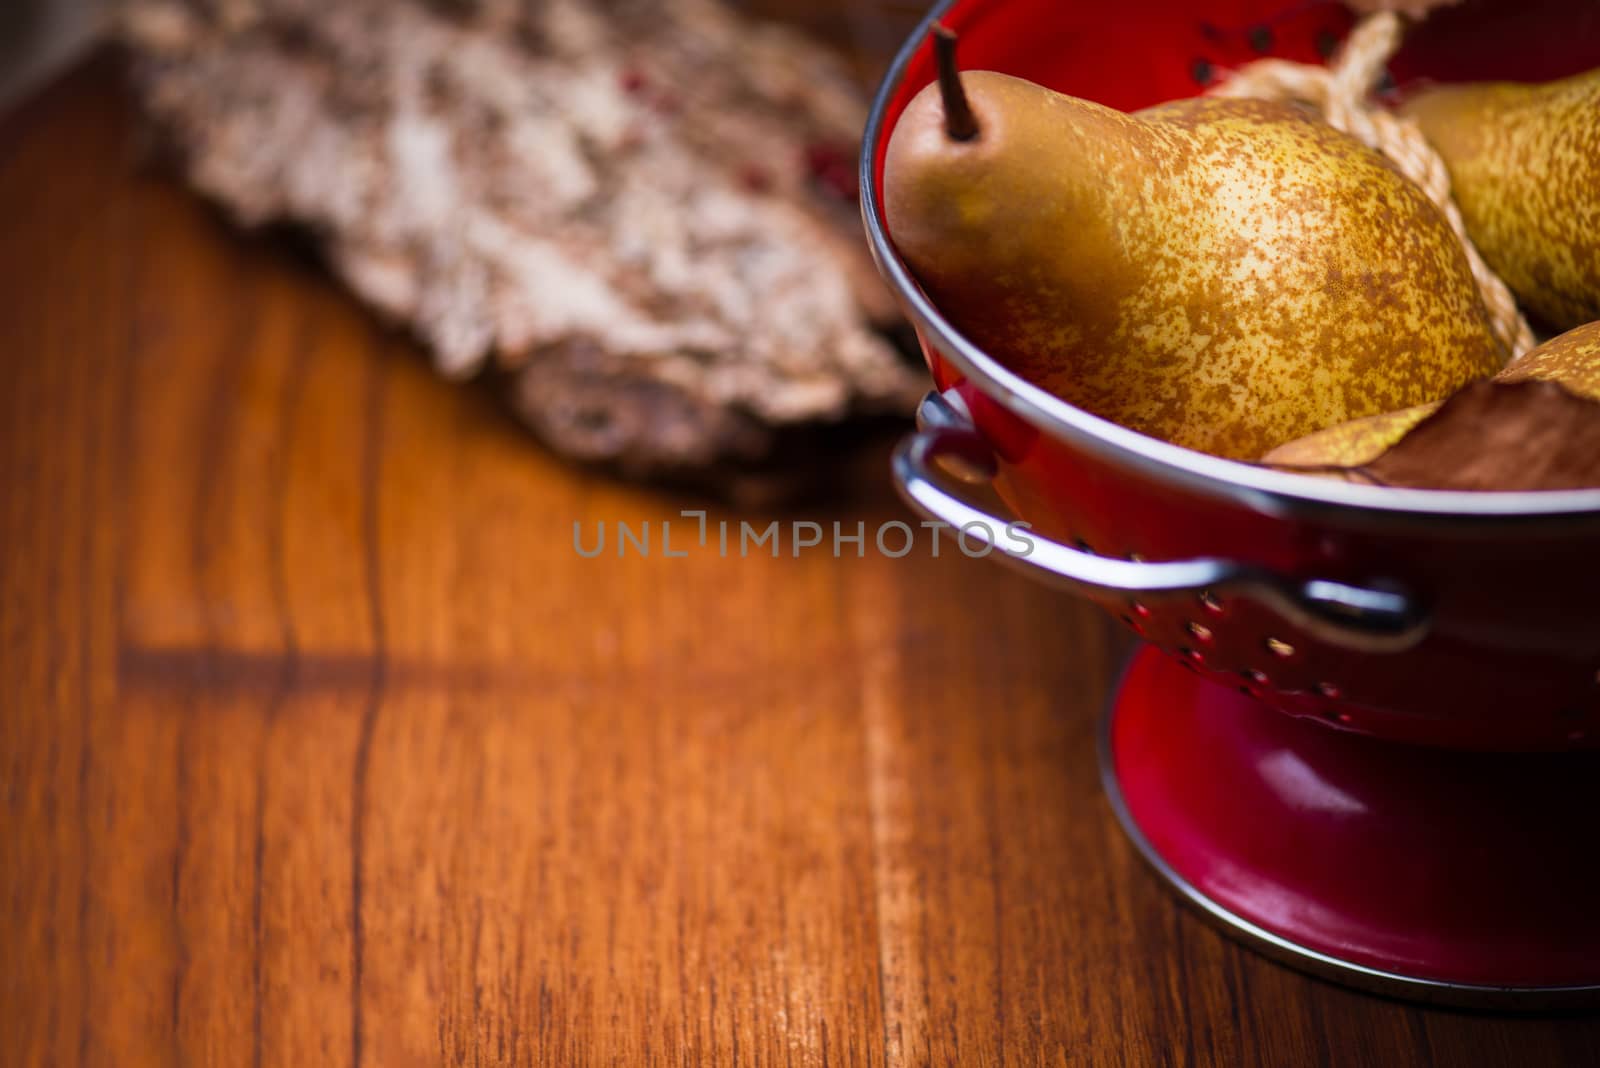 Pears on red colander by cristinphotos